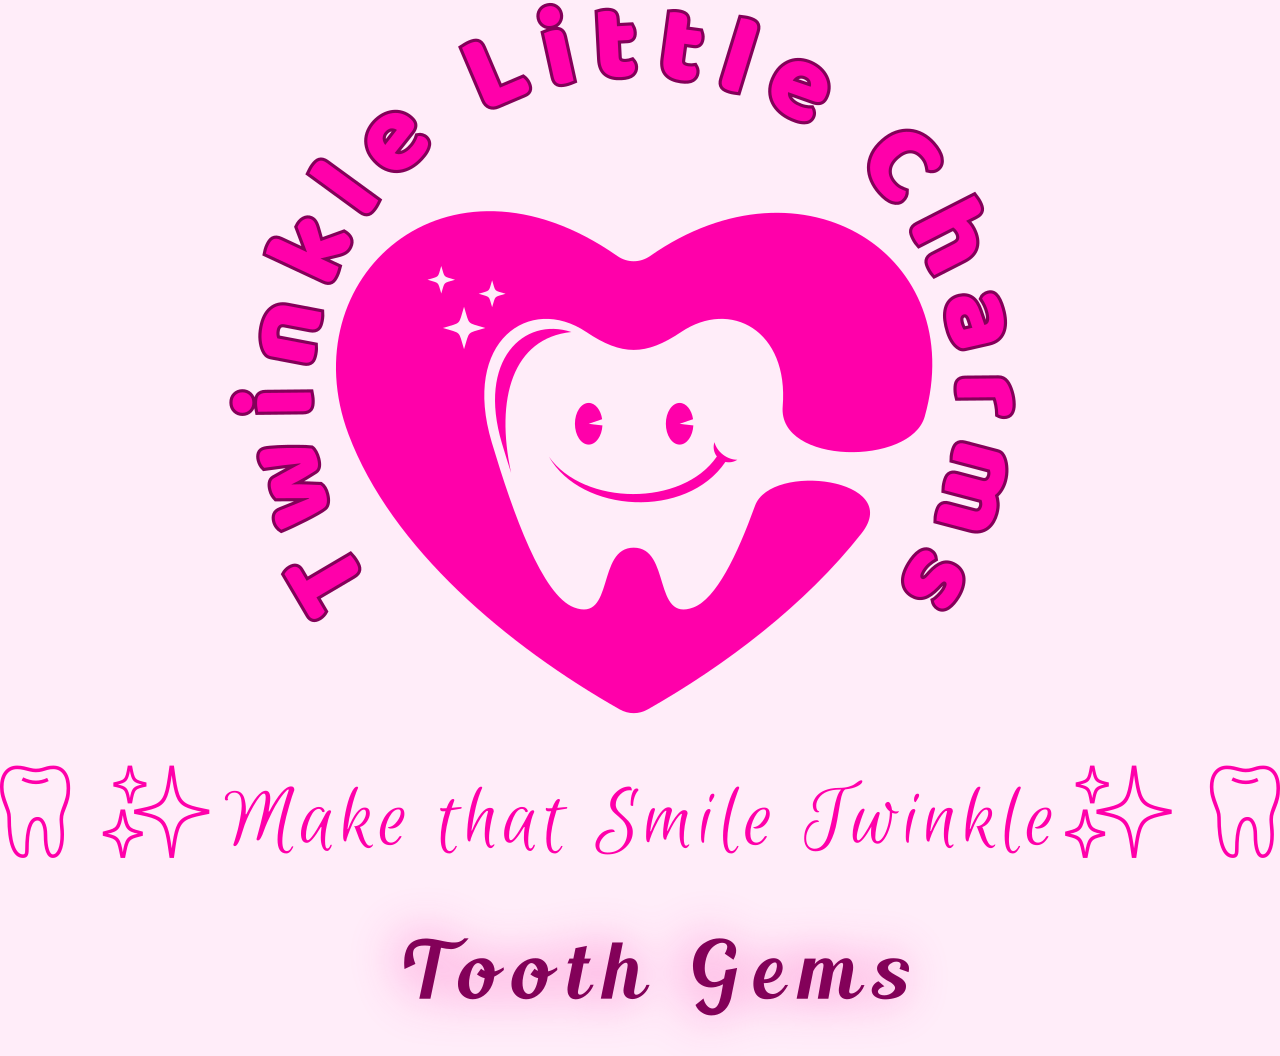 Twinkle Little Charms's web page